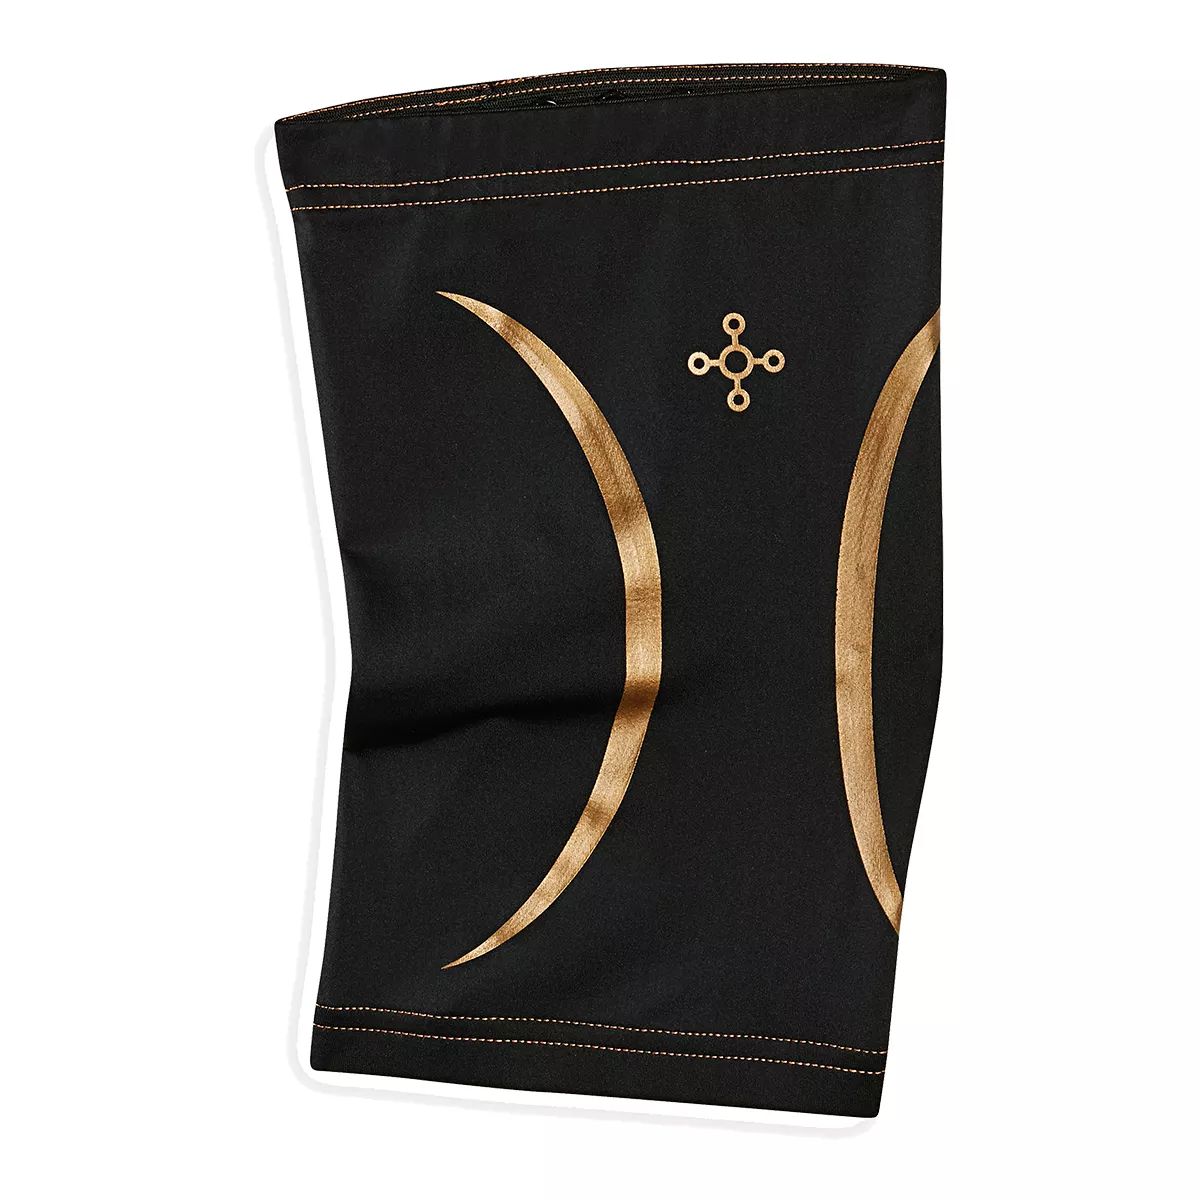 Image of Tommie Copper Compression Knee Sleeve - Black